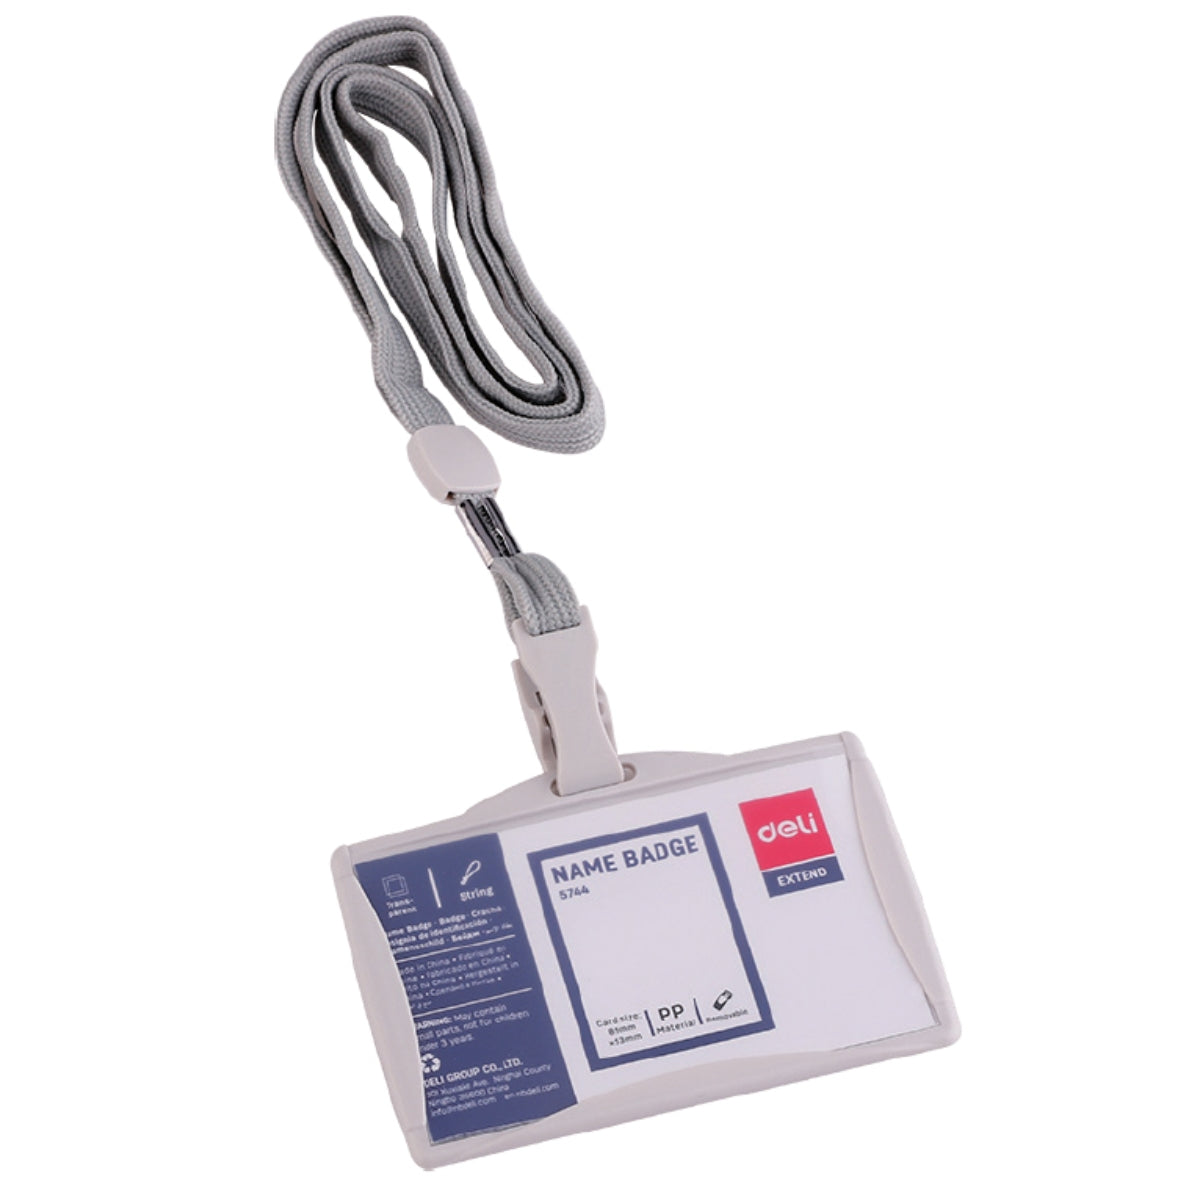 deli 5744 Hard PP ID Pass Holder with Lanyard Grey